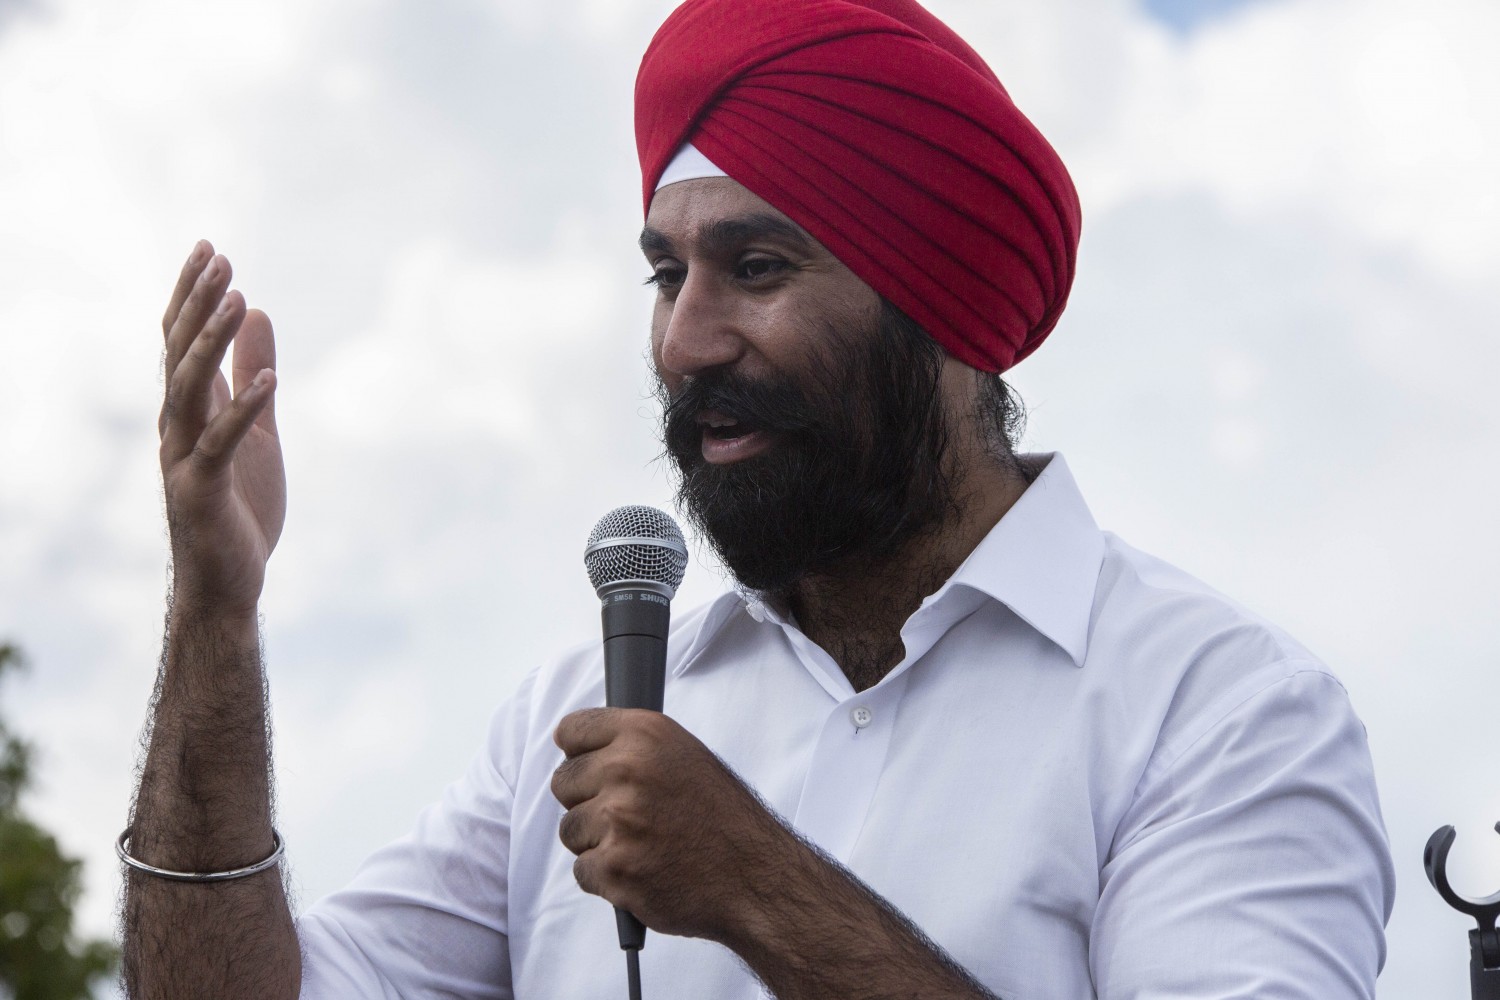 UPDATE: Probe into allegations of conflict of interest against Raj Grewal continues despite resignation over gambling problems